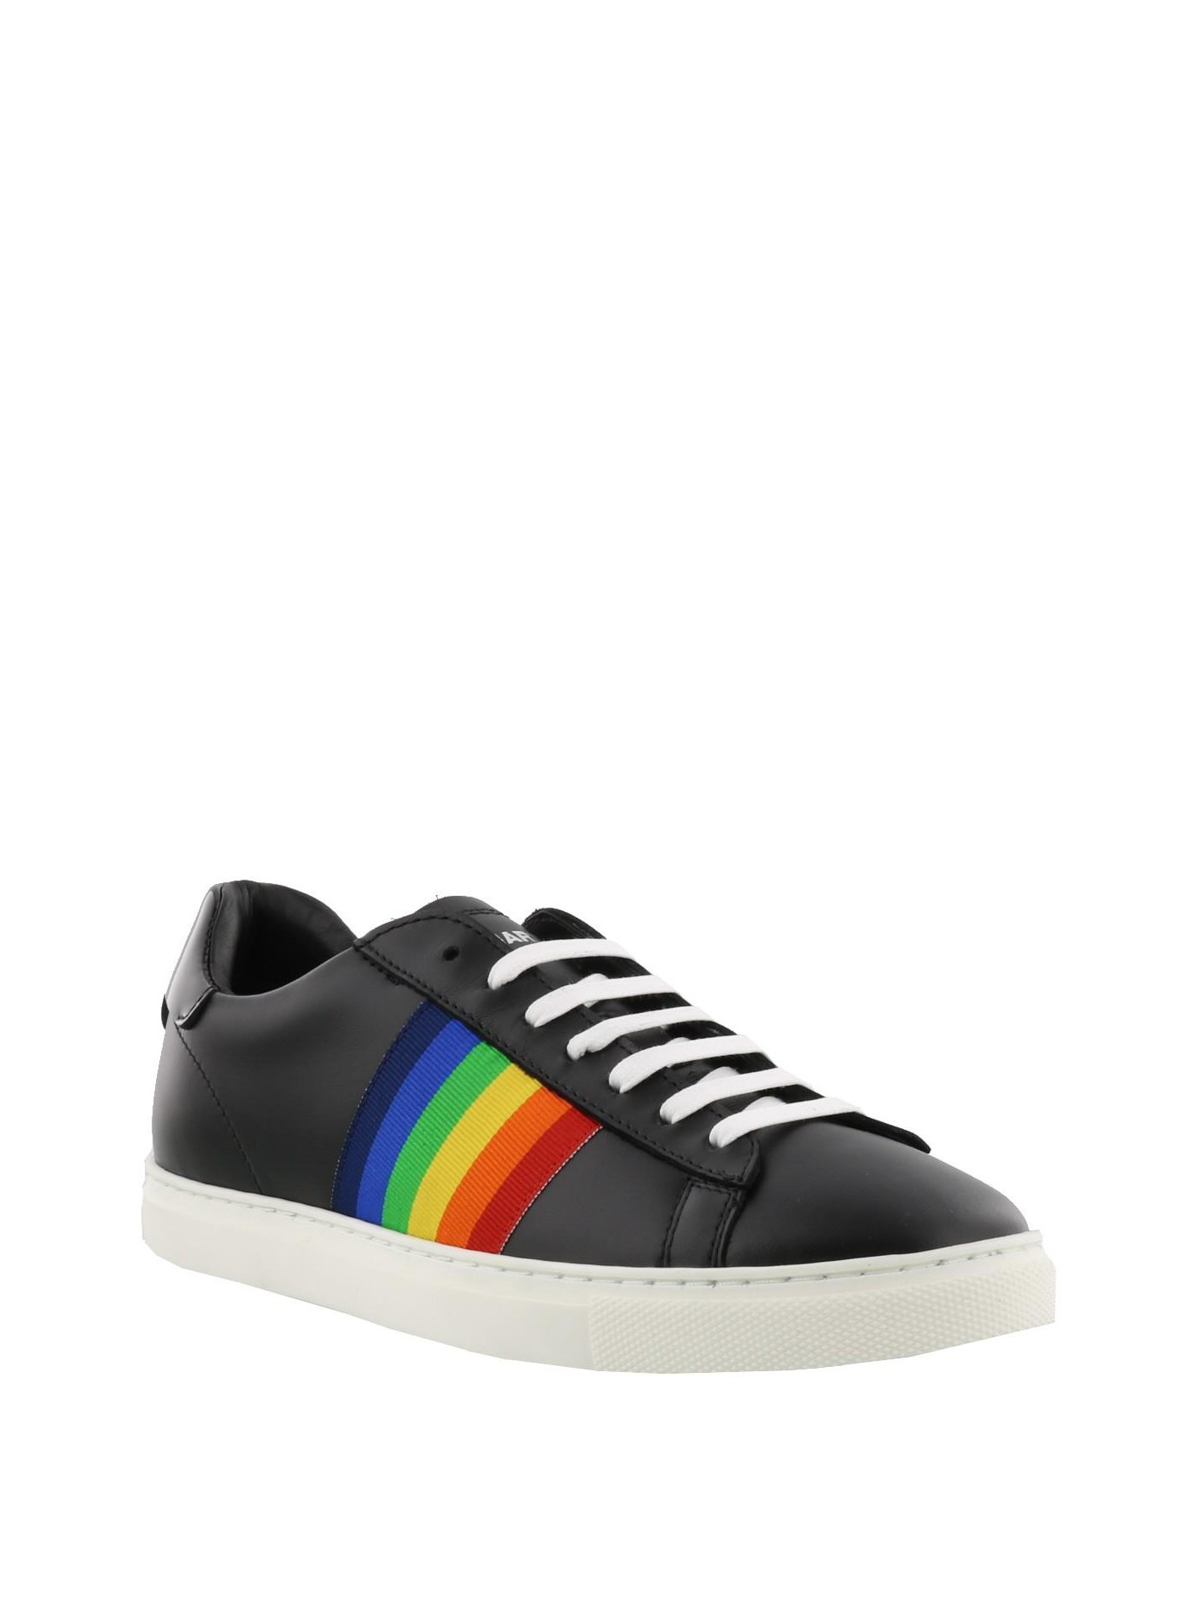 dsquared2 rainbow sneakers